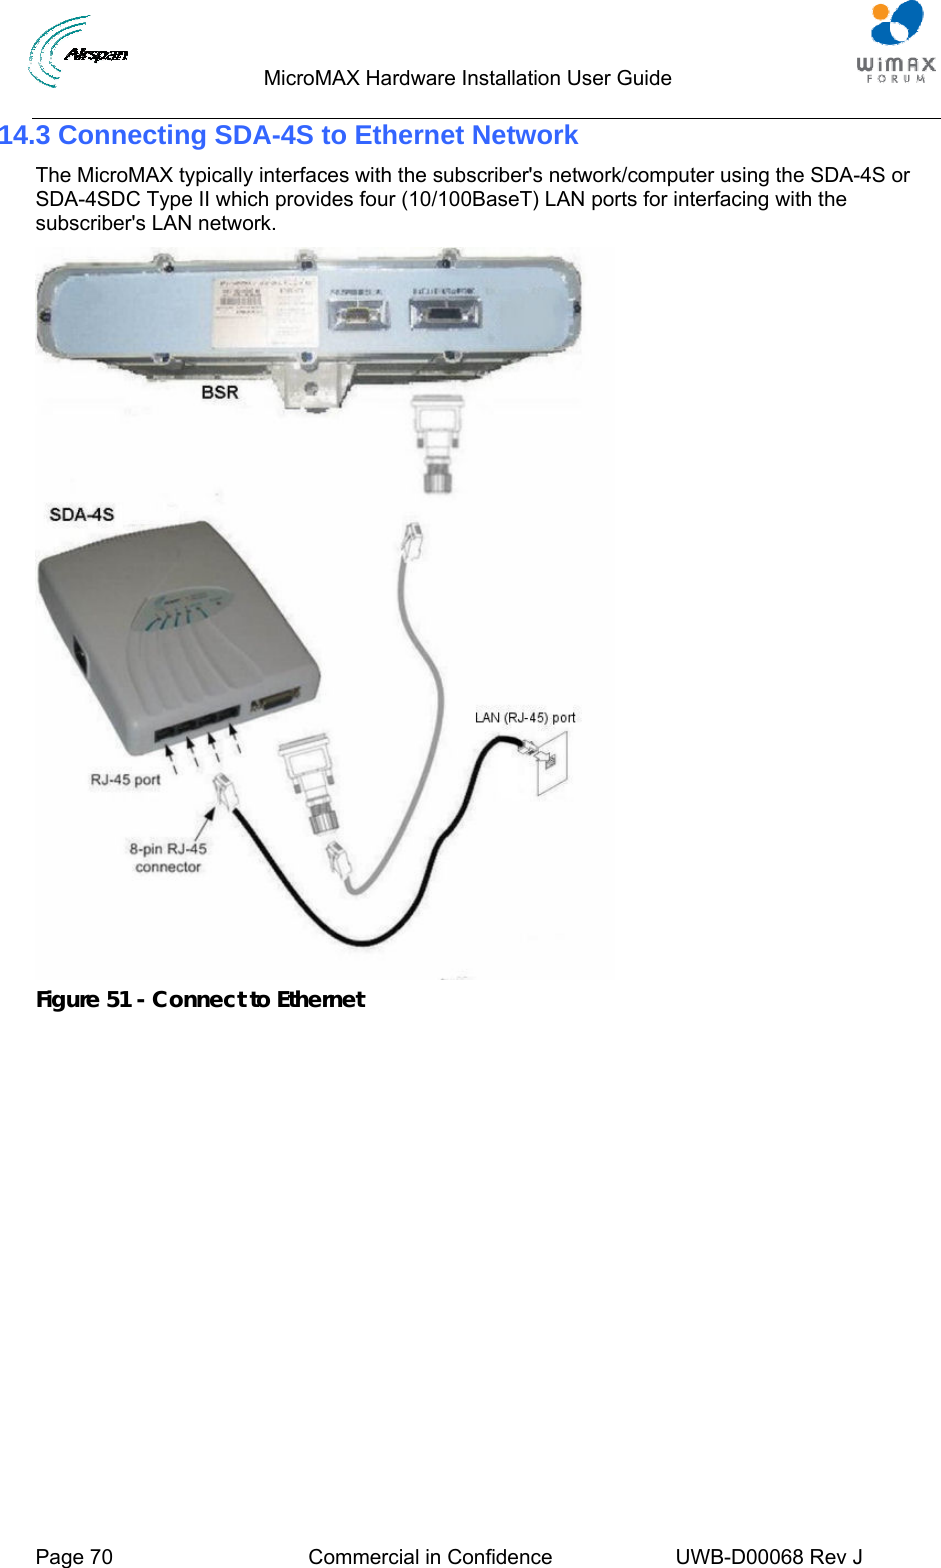                                  MicroMAX Hardware Installation User Guide     Page 70  Commercial in Confidence  UWB-D00068 Rev J   14.3 Connecting SDA-4S to Ethernet Network The MicroMAX typically interfaces with the subscriber&apos;s network/computer using the SDA-4S or SDA-4SDC Type II which provides four (10/100BaseT) LAN ports for interfacing with the subscriber&apos;s LAN network.  Figure 51 - Connect to Ethernet 